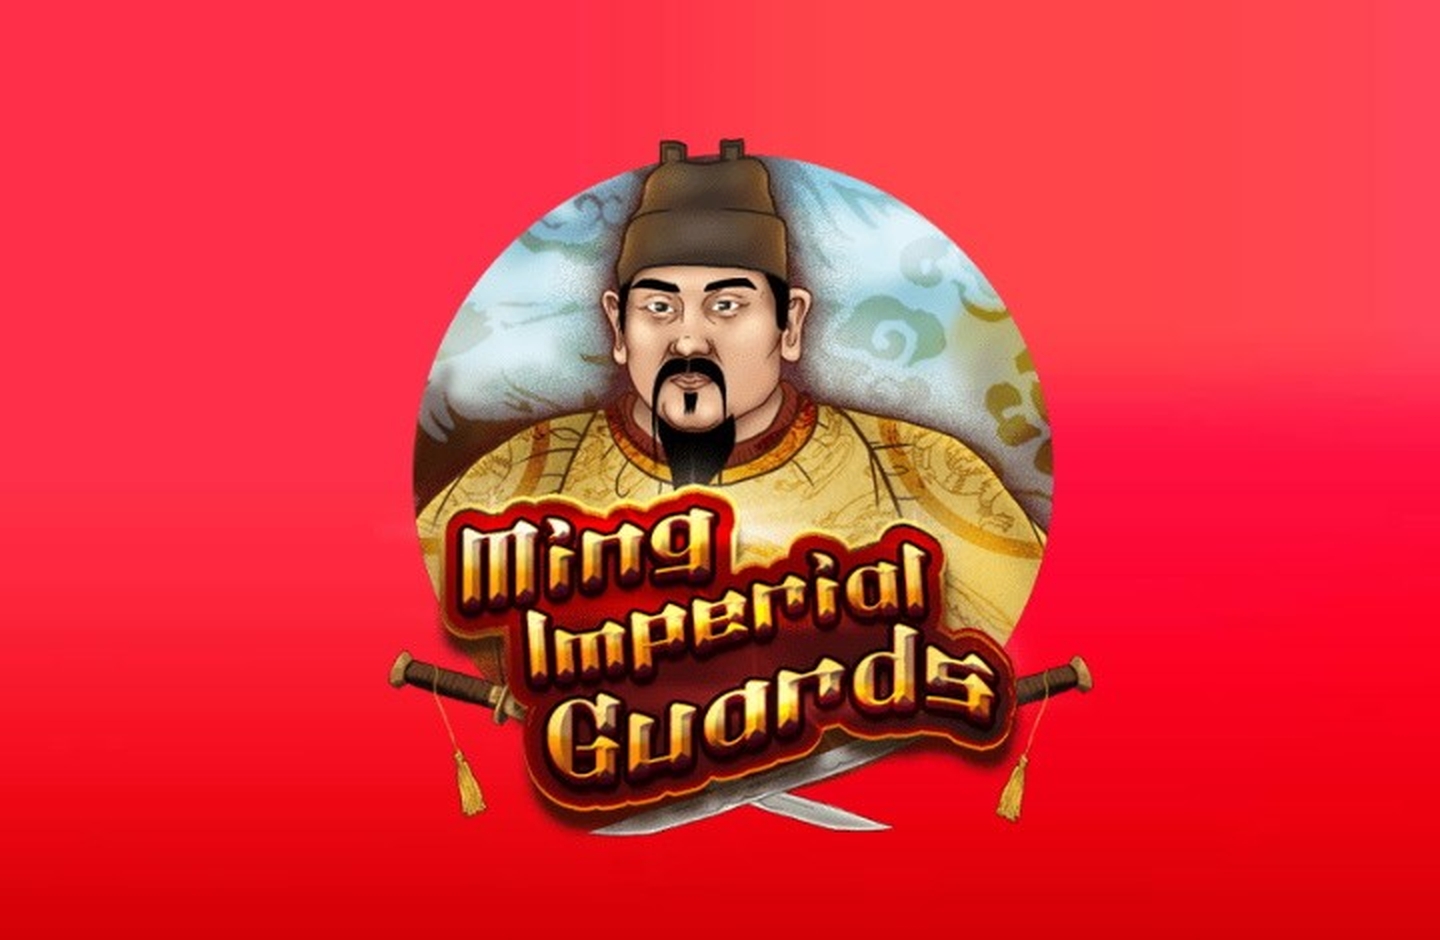 Ming Imperial Guards demo